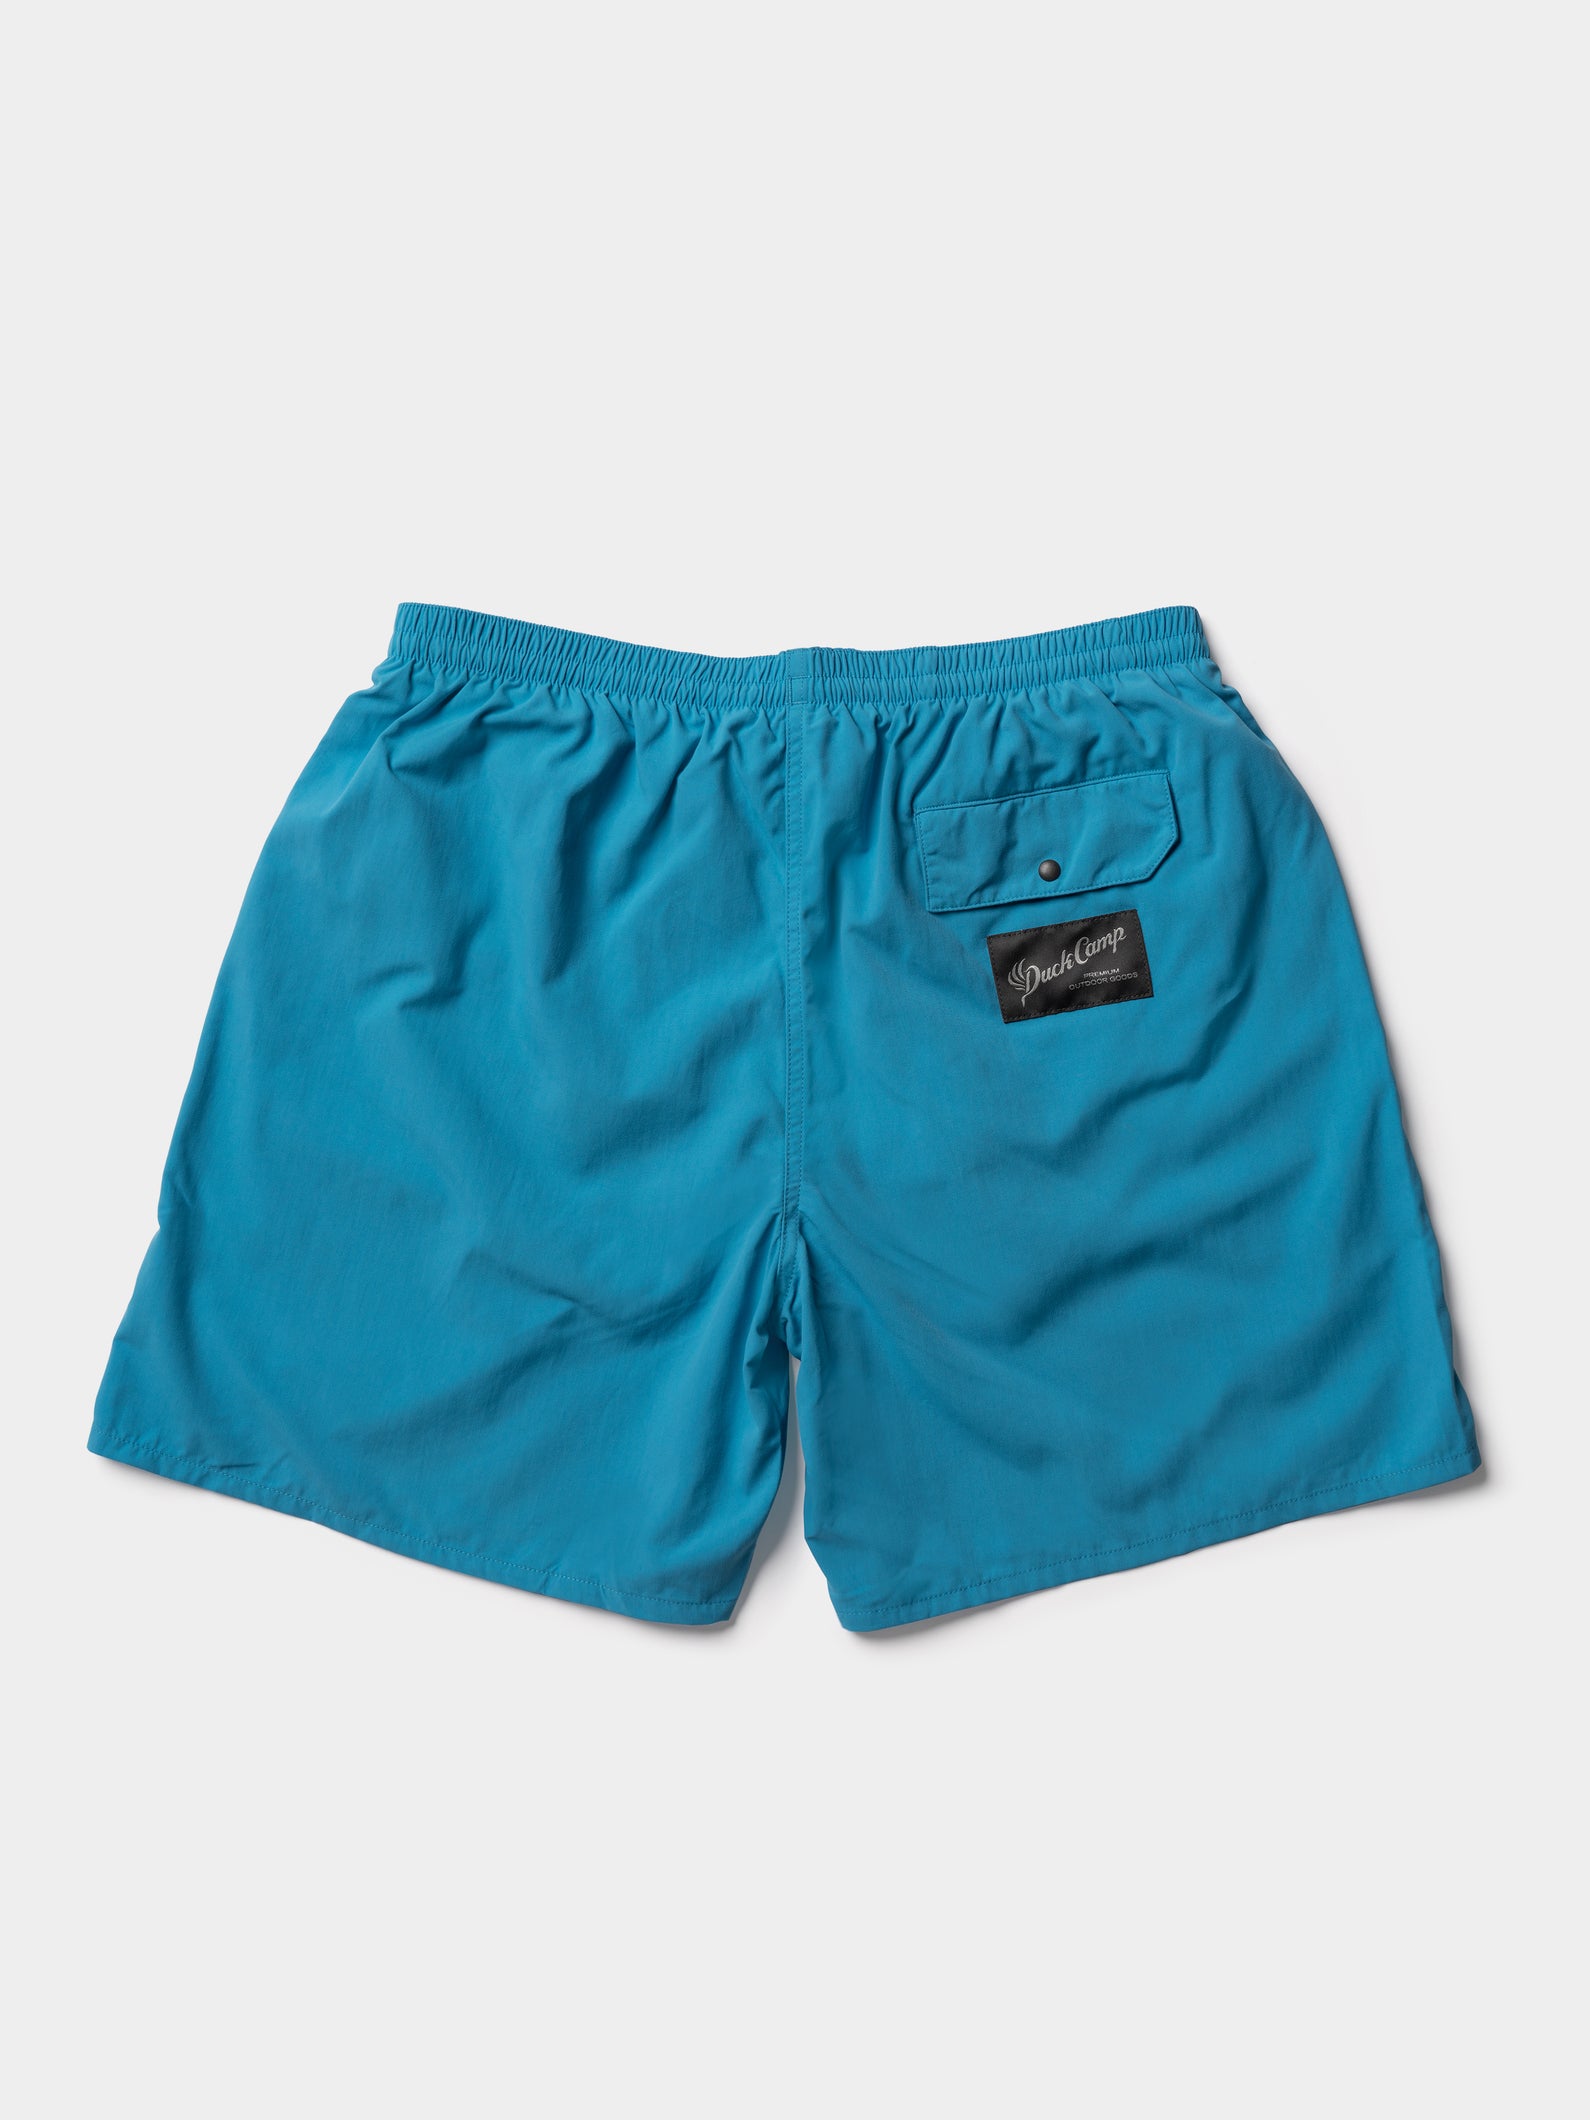 Scout Shorts 7" - Charter Blue